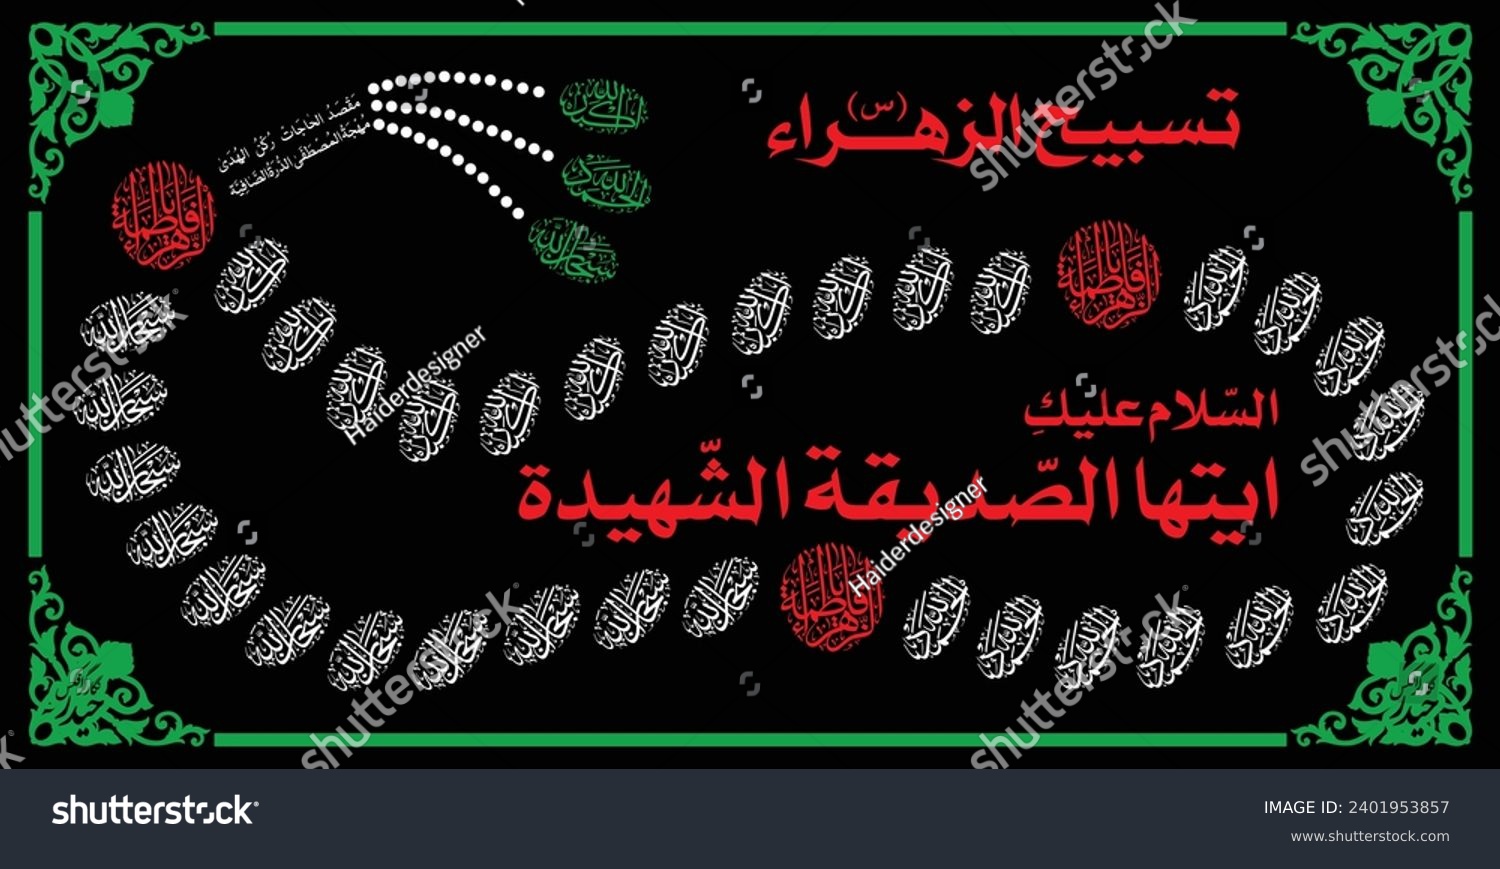 SVG of Tasbih Fatima, the special prayer given by the Prophet of Allah (PBUH) to Holy Lady Syeda Fatima Zehra (PBUP)
looking for an elegant and affordable Islamic design svg